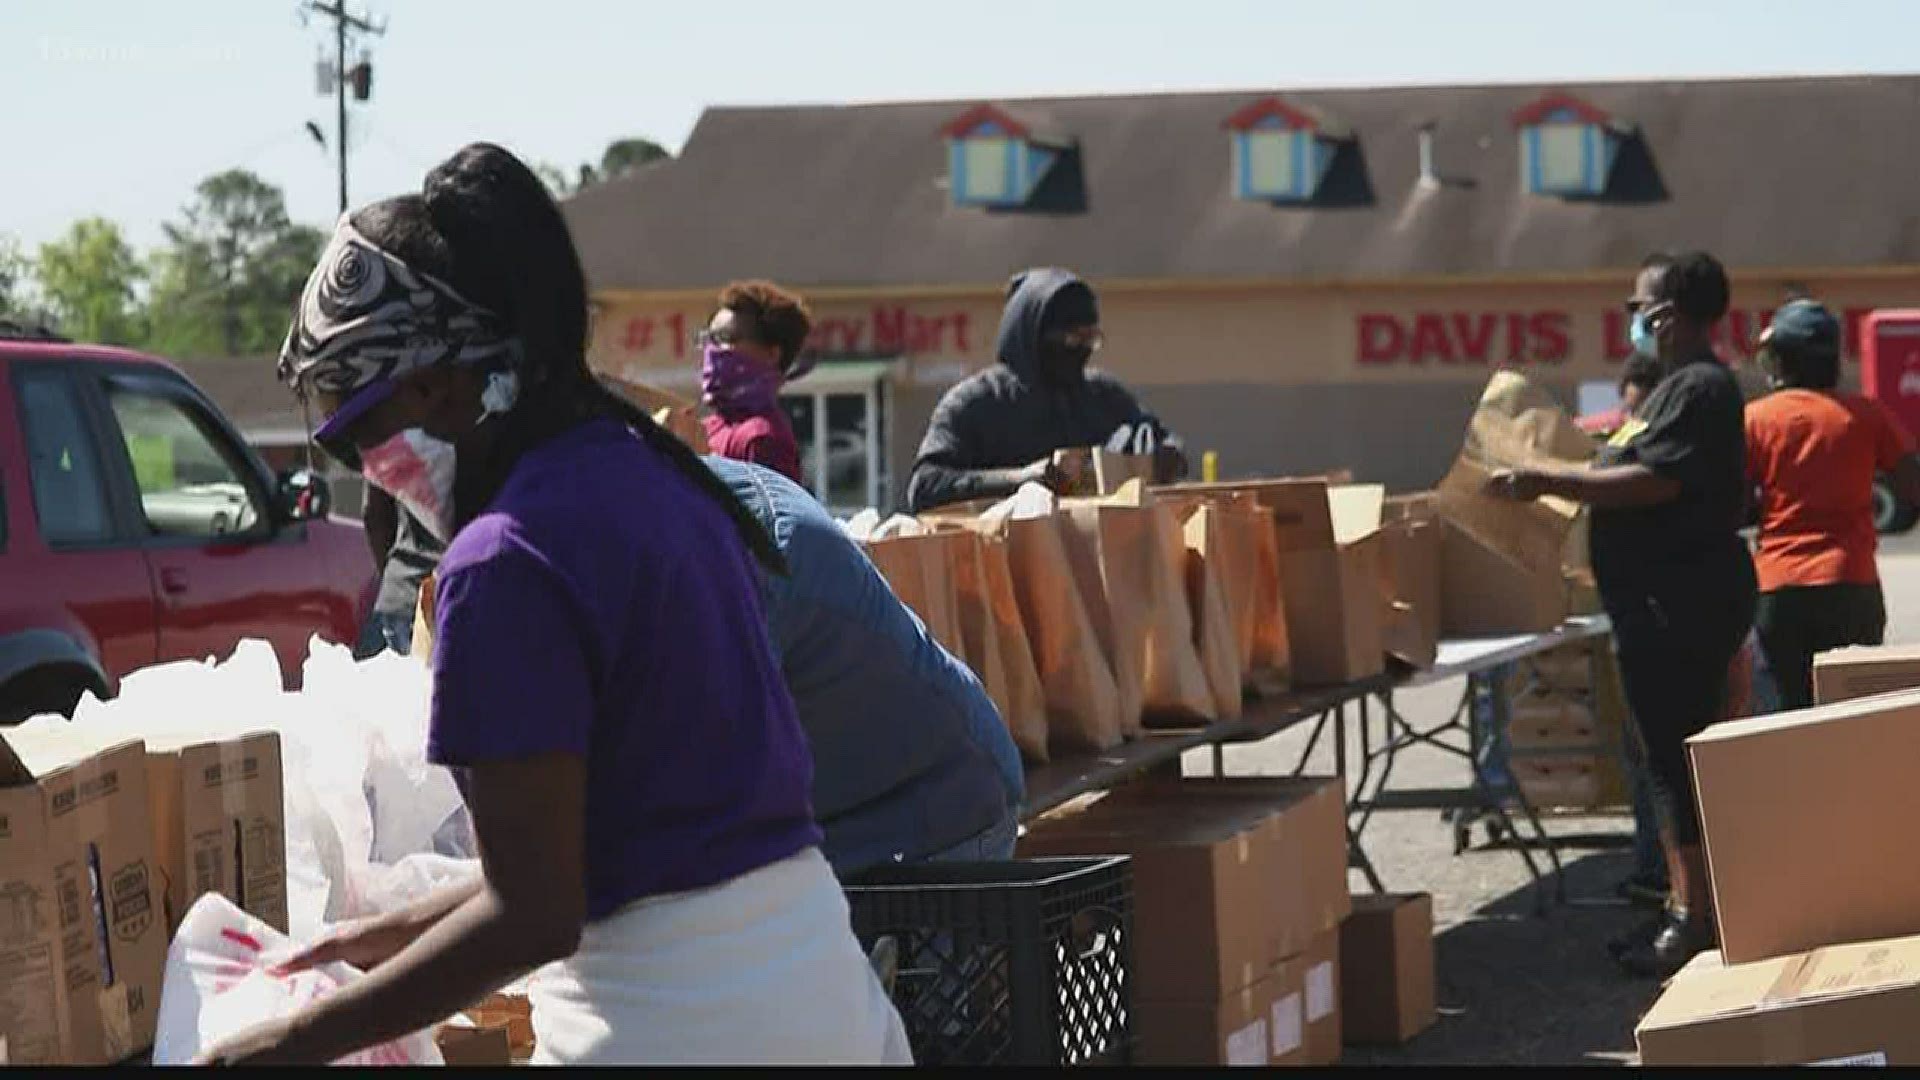 The Shekinah Glory Praise & Worship Center partnered up with the Middle Georgia Community Food Bank to feed the community through their second food drive this month.